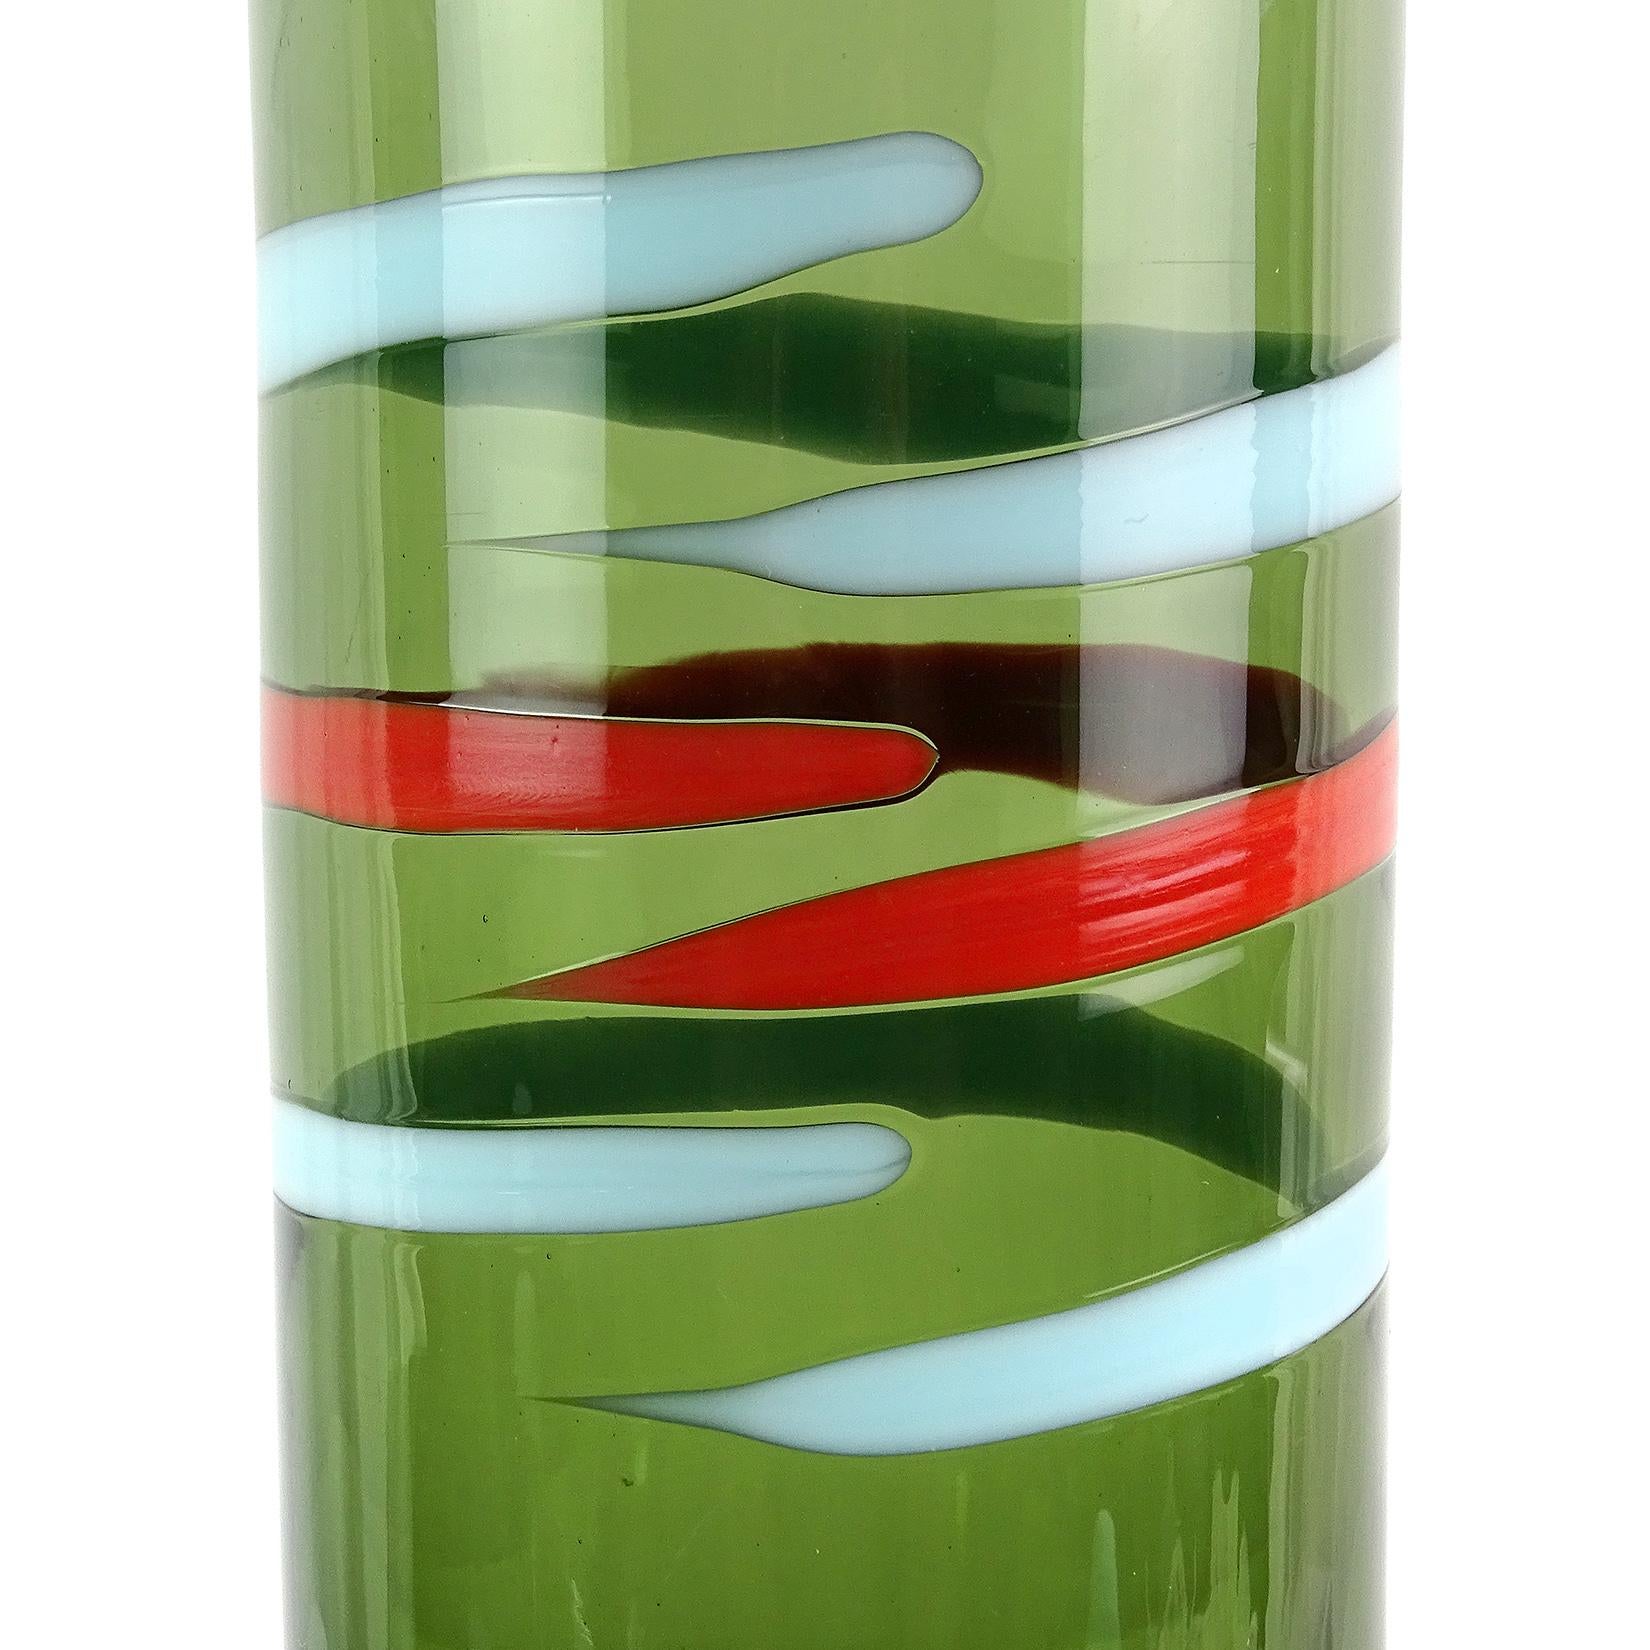 Beautiful vintage Murano hand blown green body, with red and blue stripes Italian art glass decanter. Documented to the Fratelli Toso Company. Retains its original ball stopper, matching the blue in the stripe. Great graphic design and color